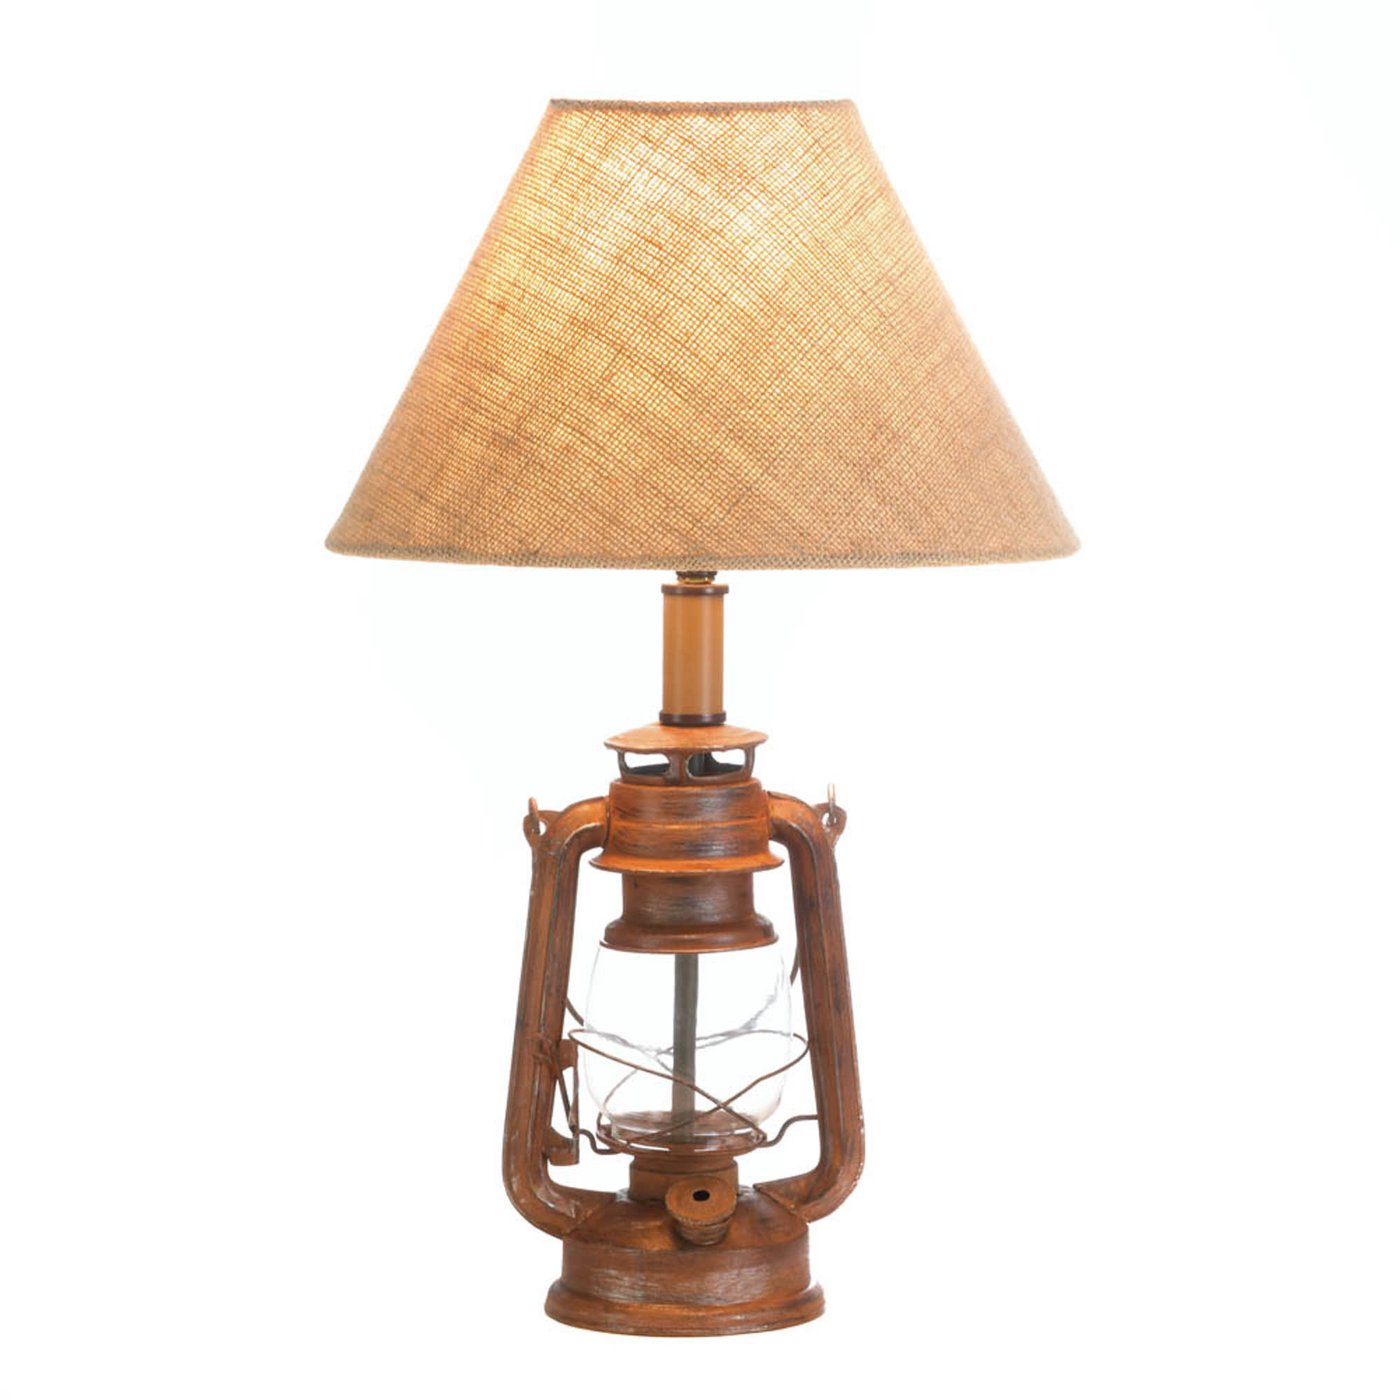 Vintage-Look Camping Lantern Table Lamp Accent Plus